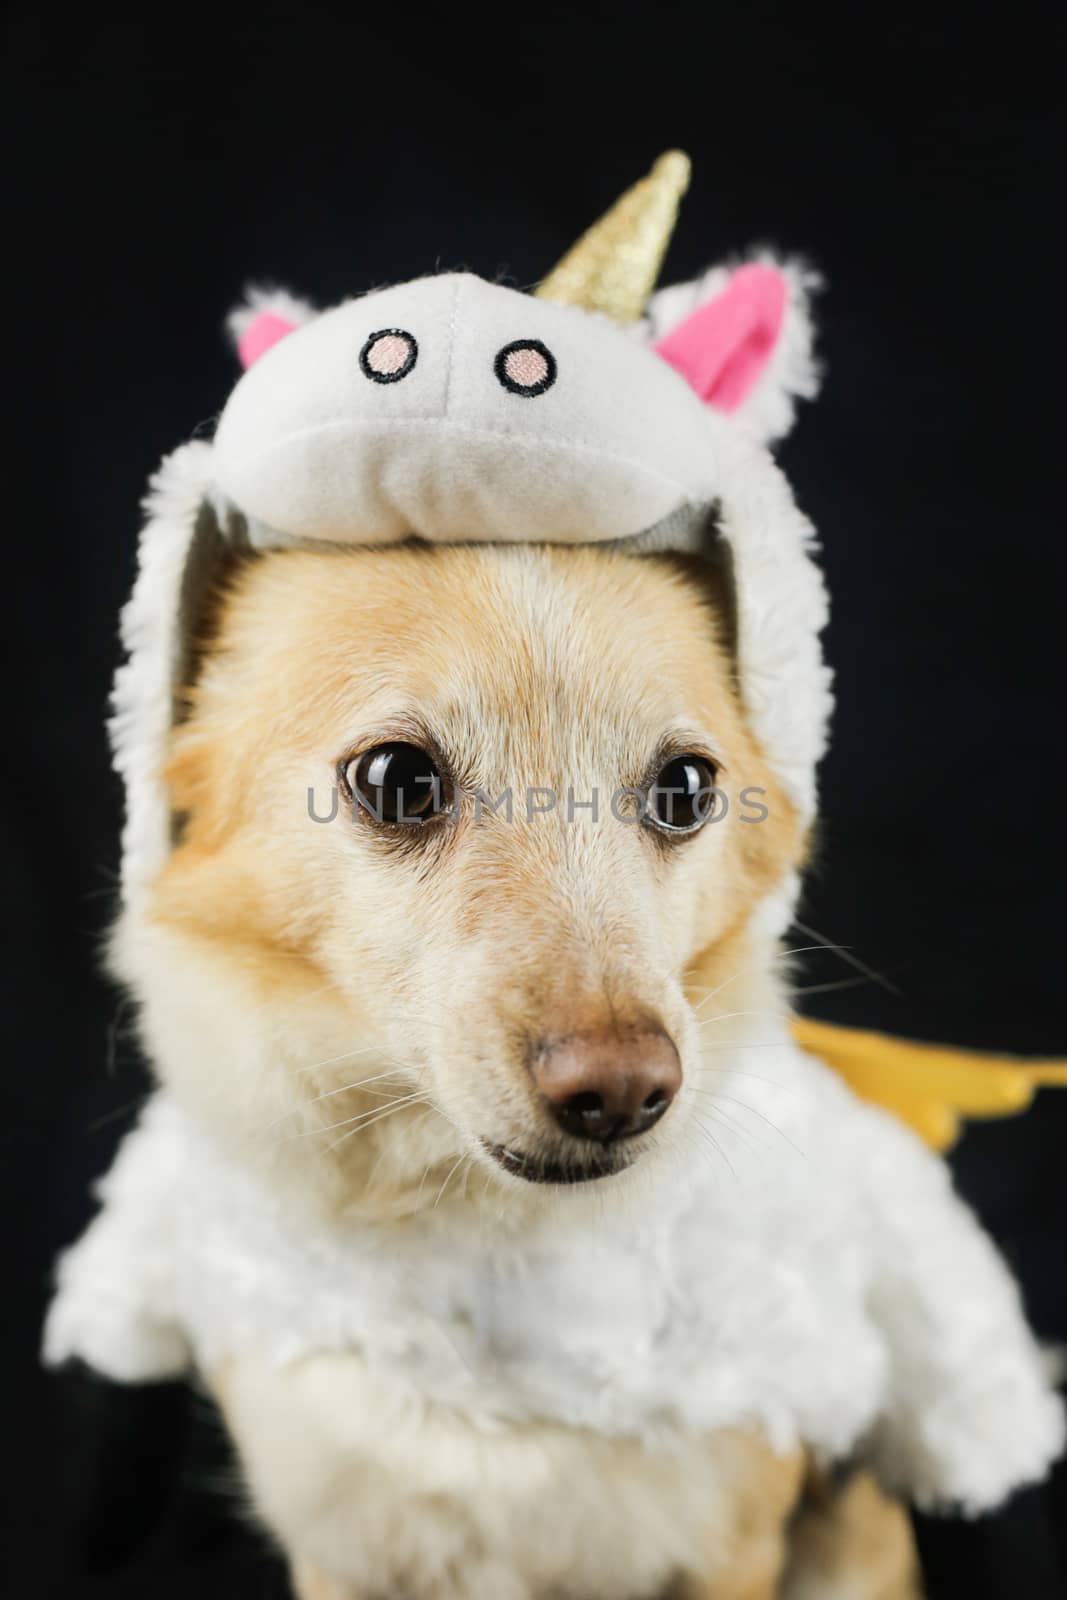 Dog in a funny unicorn costume. Dress, clothes for animals by Grinchenkophoto